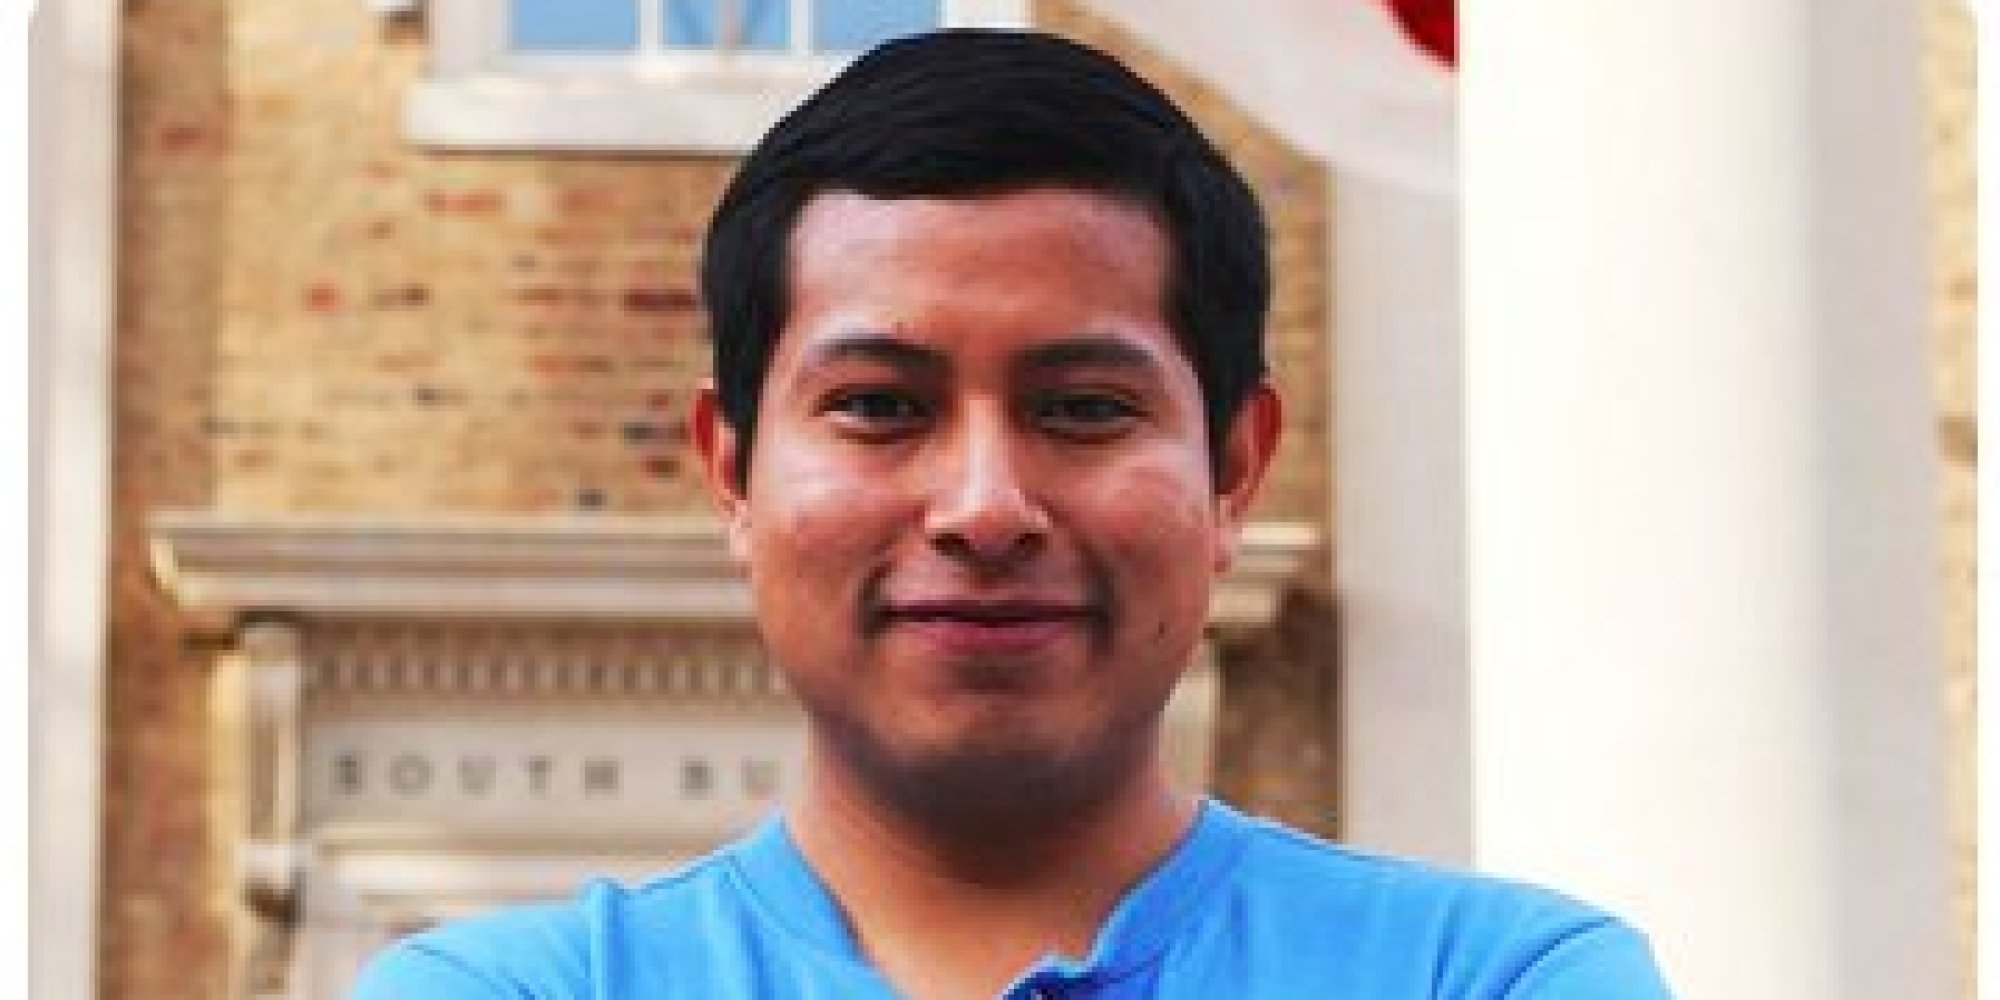 Emilio Vicente Runs For All Undocumented Students In Race For UNC Student Body President - o-EMILIO-VICENTE-facebook